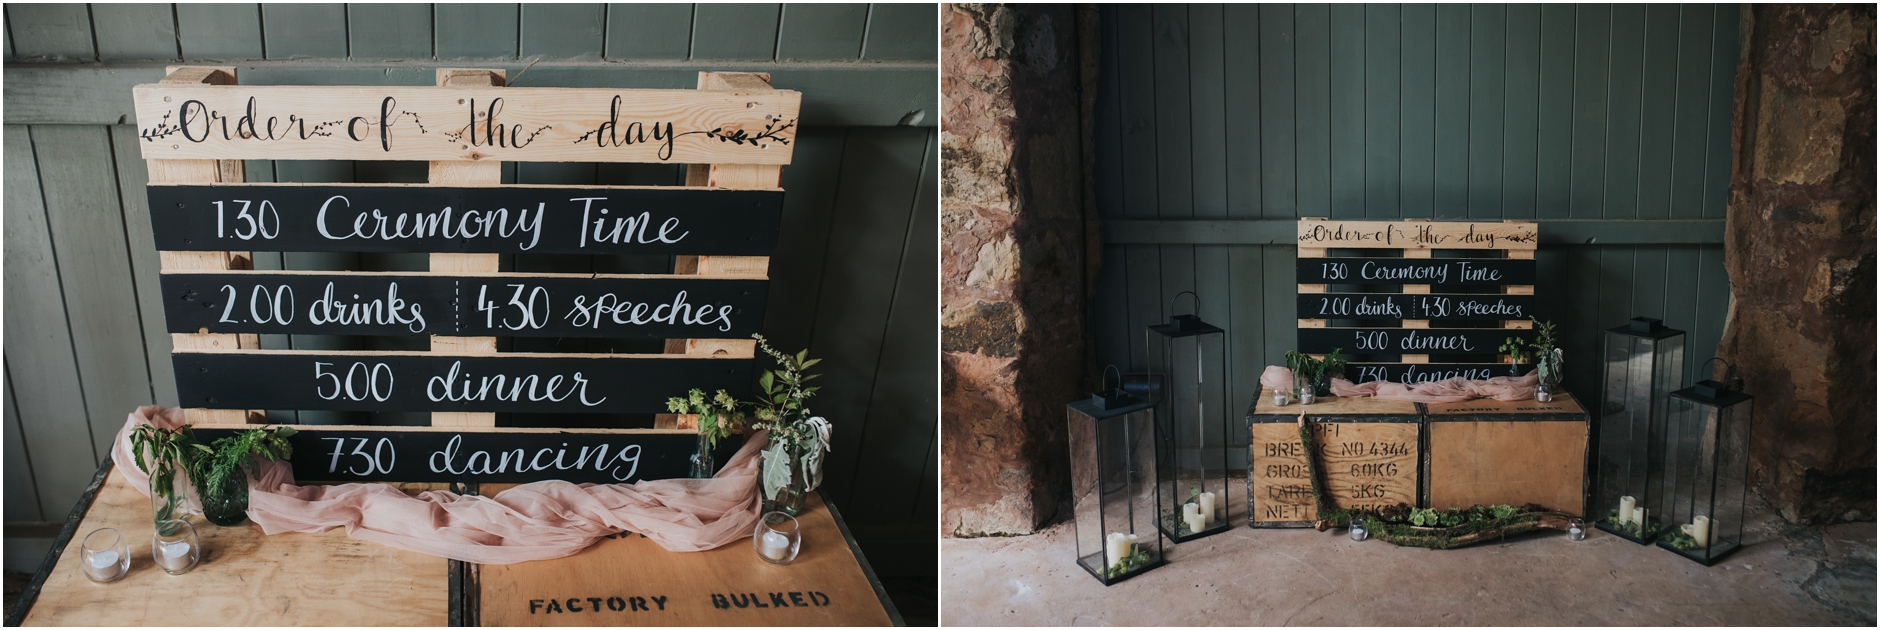 cow shed wedding crail venue details and set up by little white cow